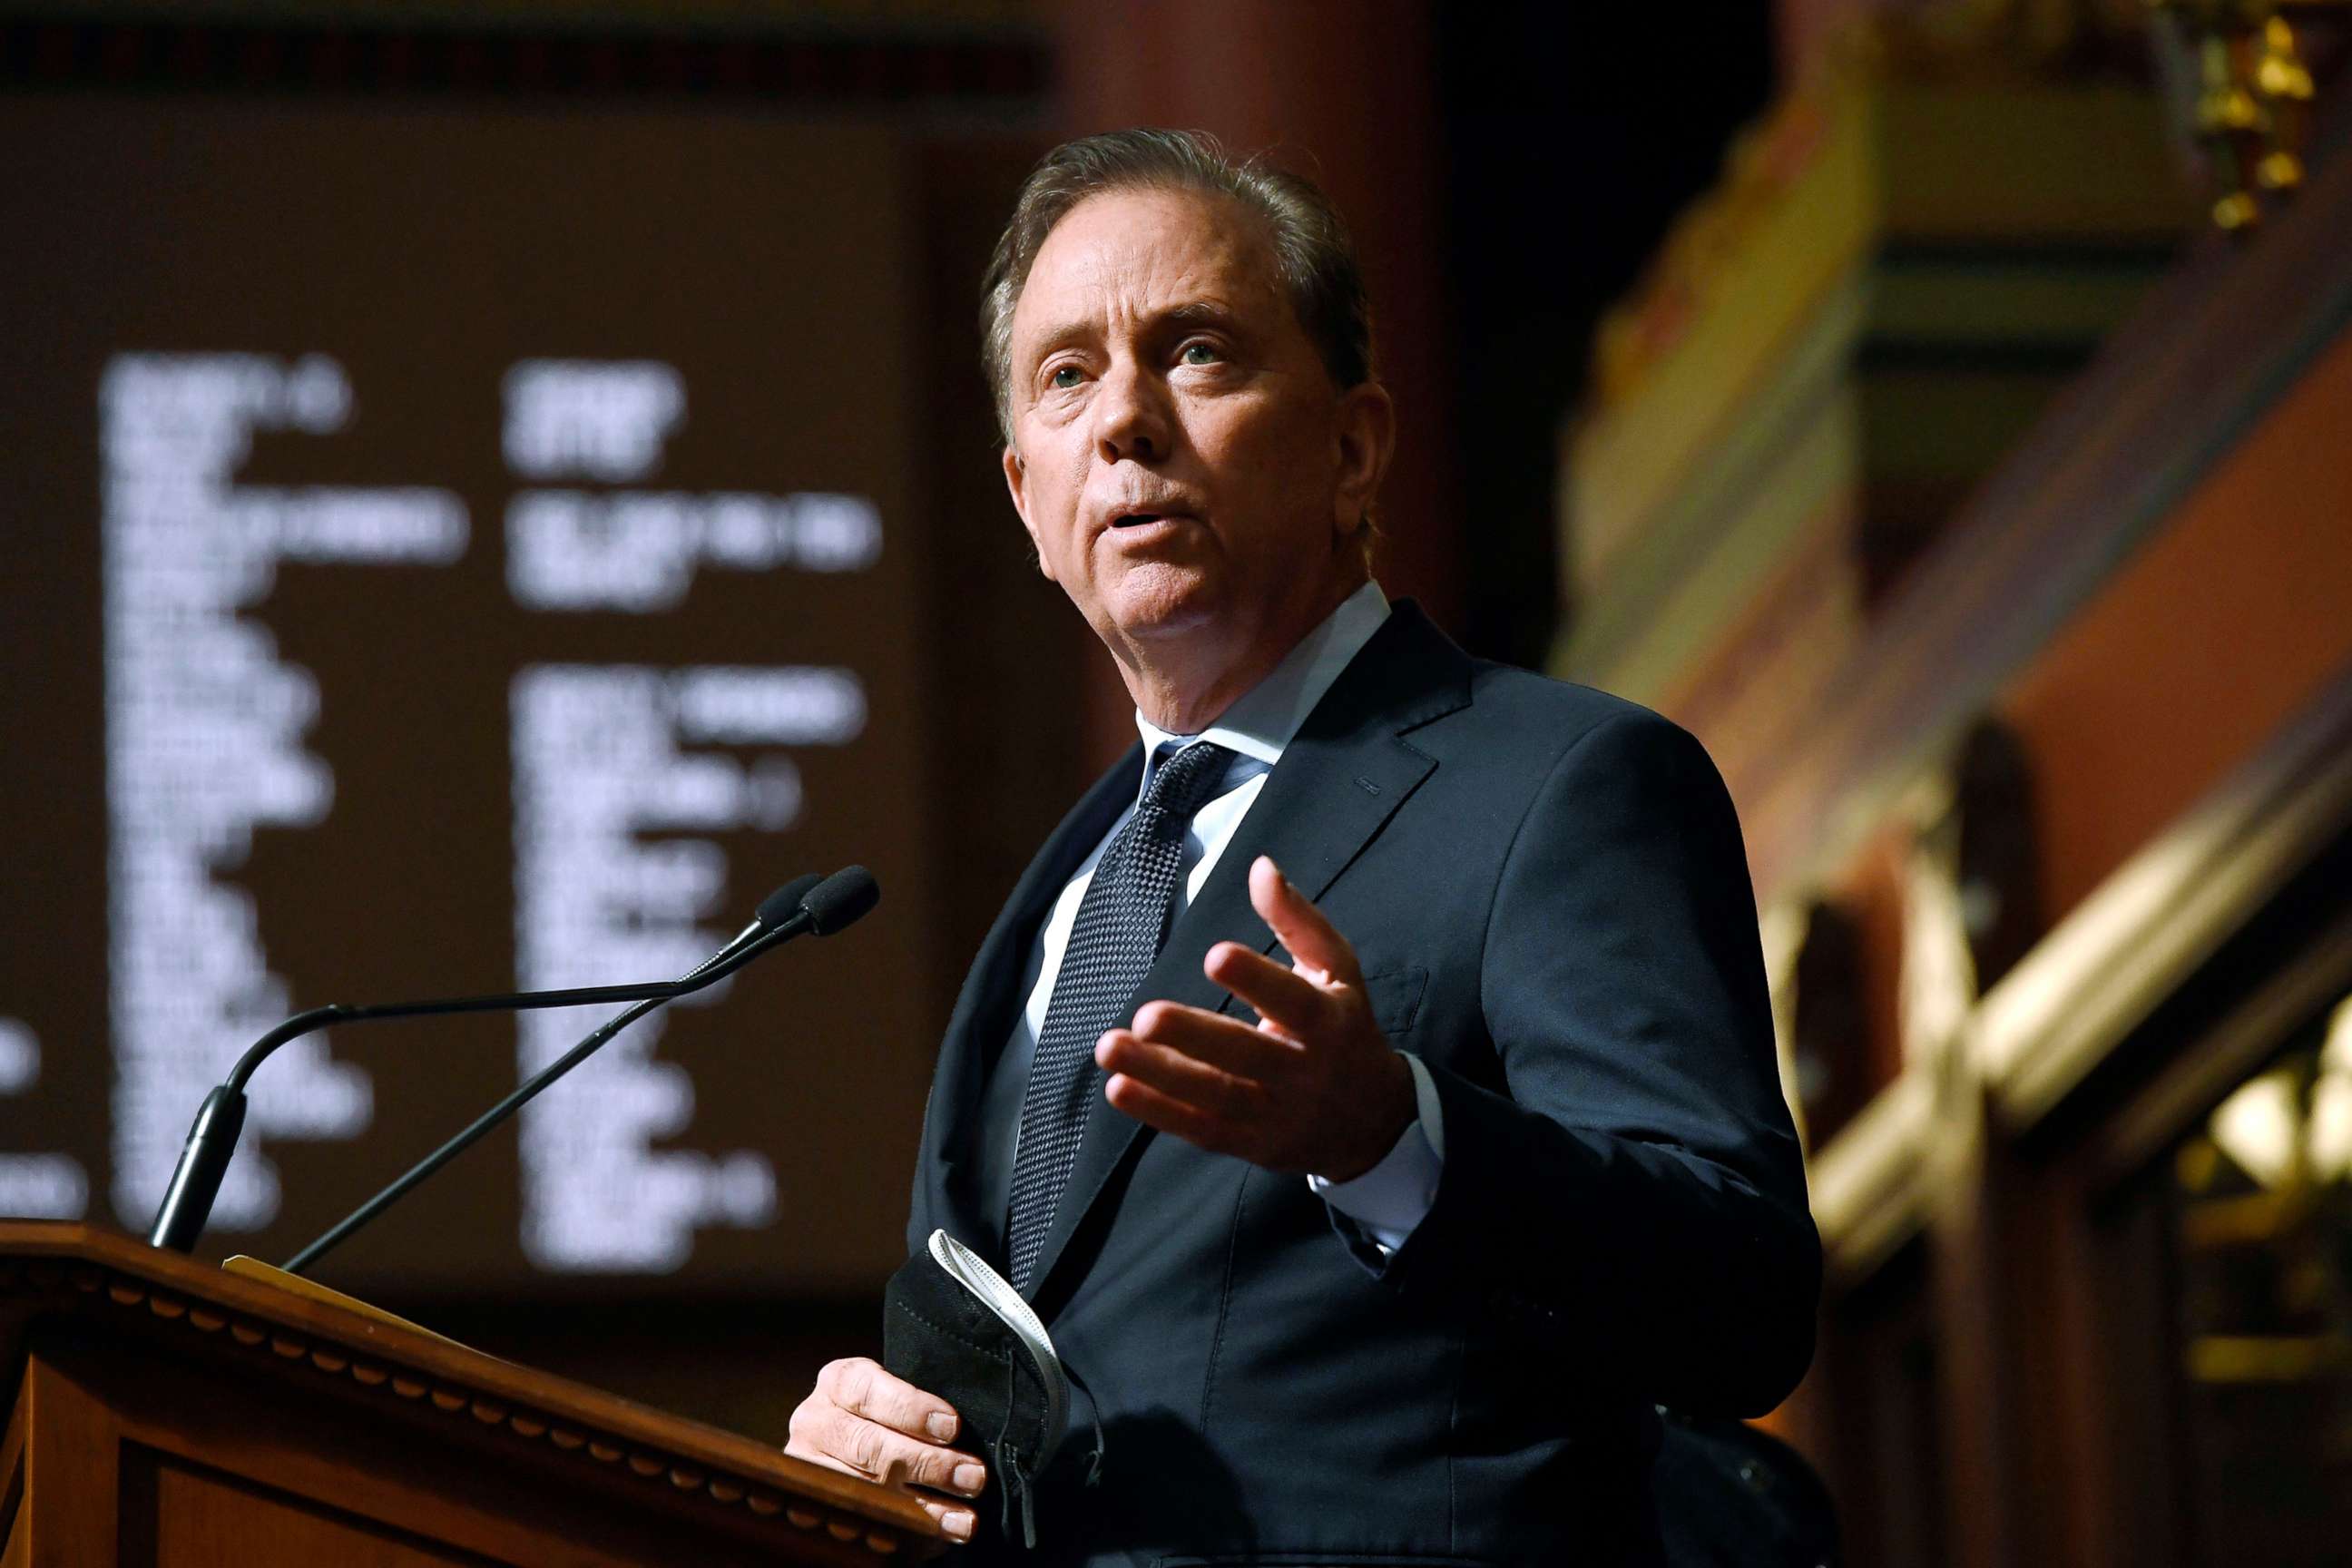 PHOTO: In this Feb. 9, 2022, file photo, Connecticut Gov. Ned Lamont delivers the State of the State address during opening session at the State Capitol, in Hartford, Conn.